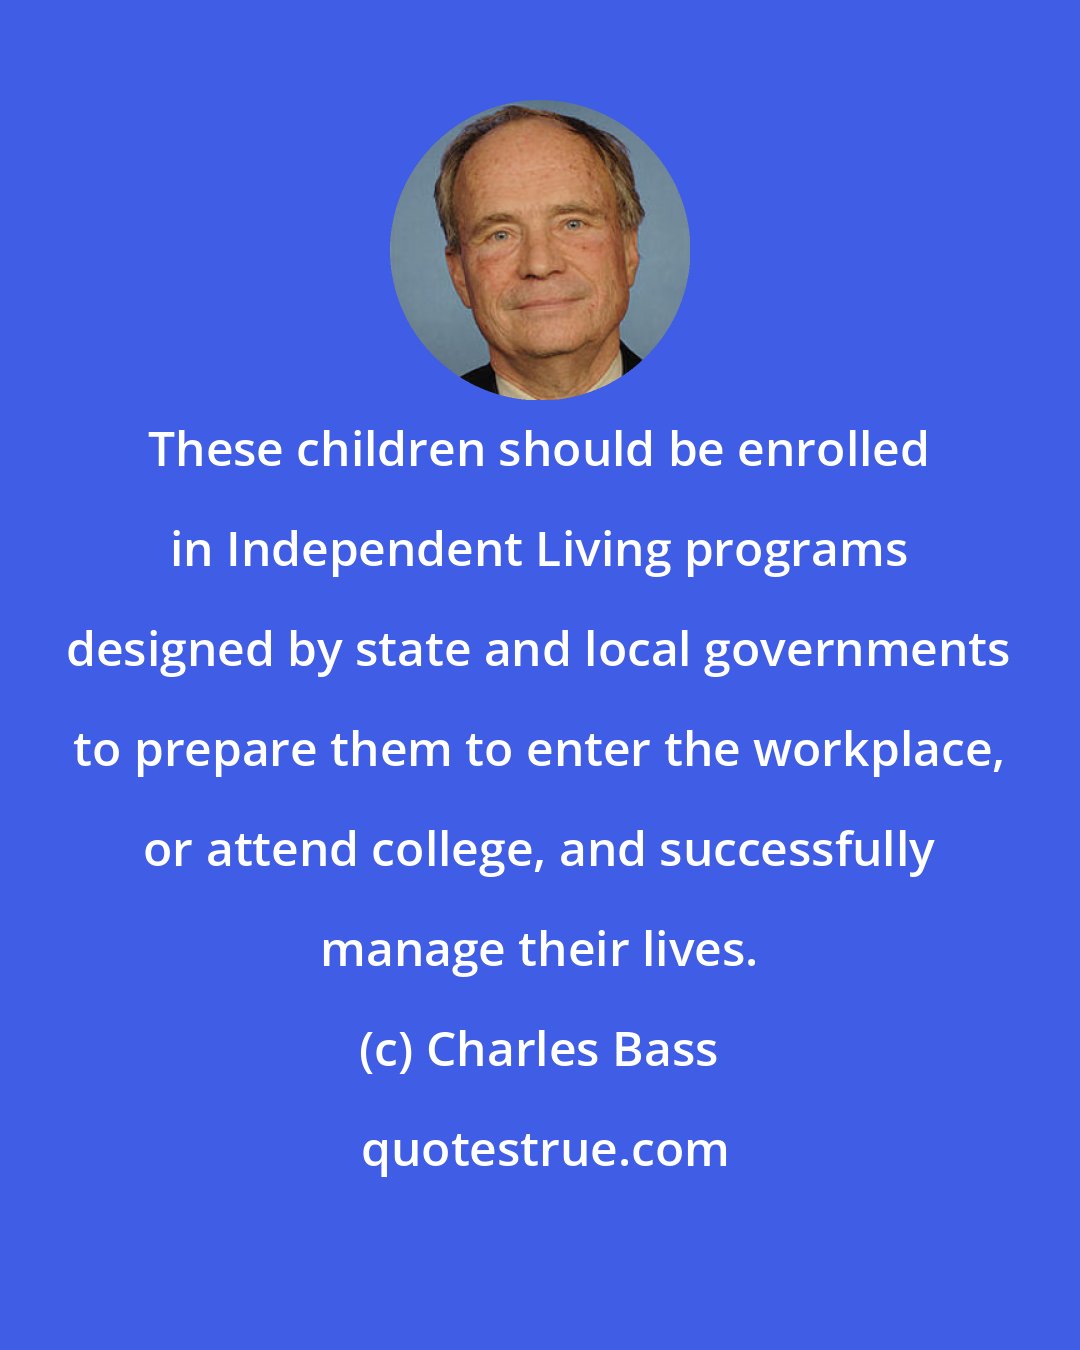 Charles Bass: These children should be enrolled in Independent Living programs designed by state and local governments to prepare them to enter the workplace, or attend college, and successfully manage their lives.